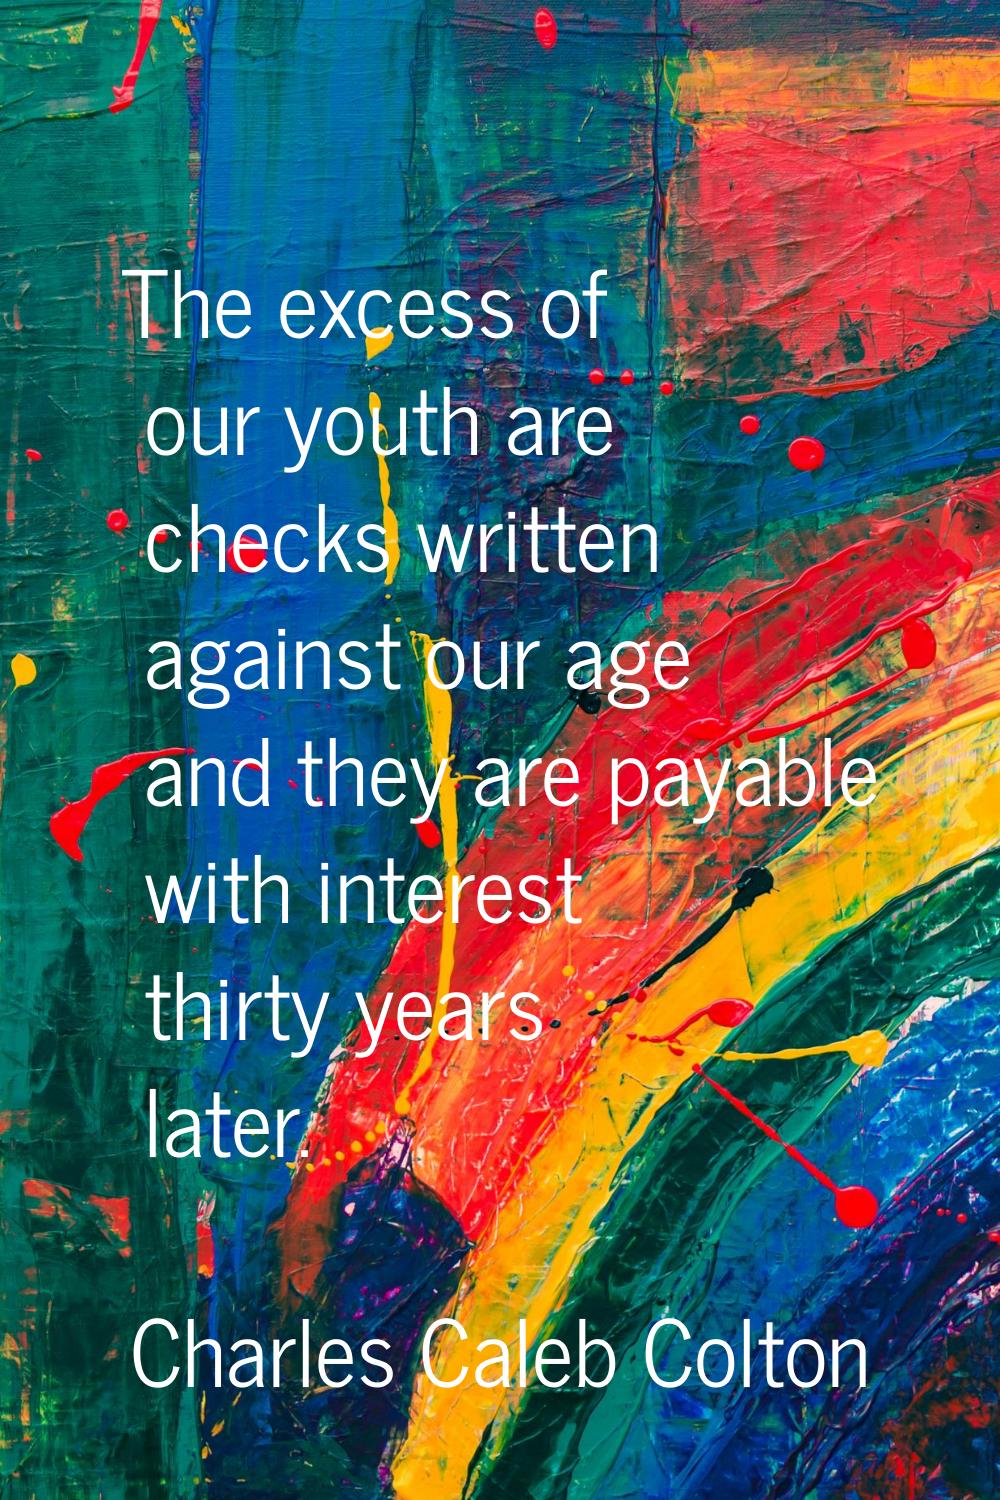 The excess of our youth are checks written against our age and they are payable with interest thirt